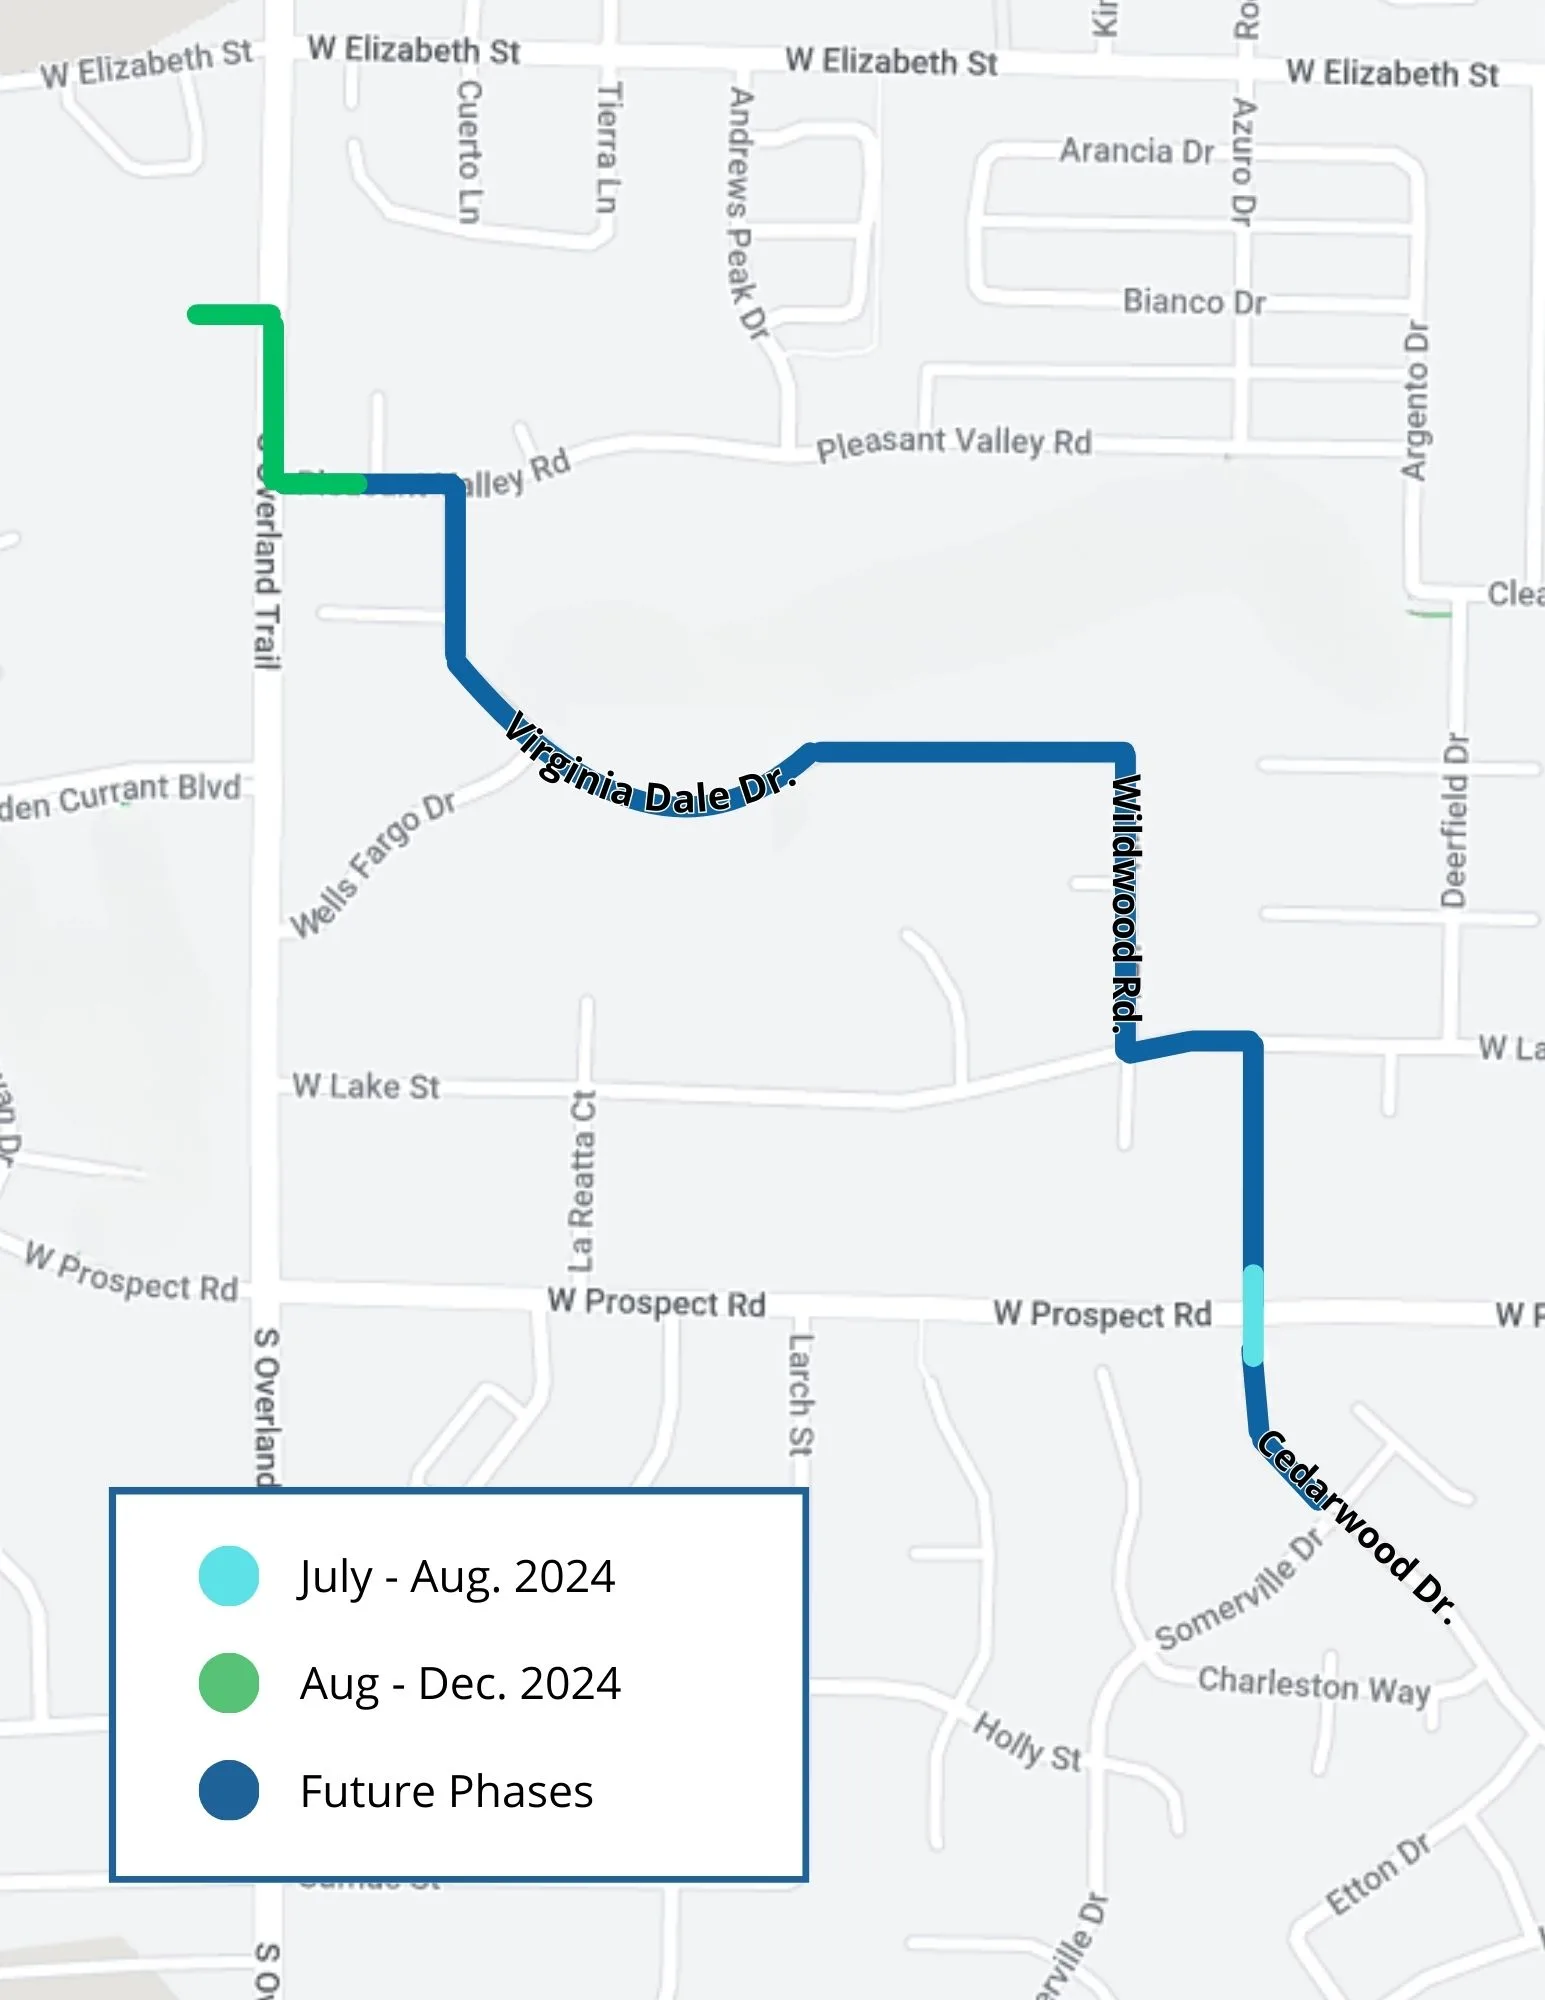 Map of anticipated road closures during Phase 2 of the Western Backbone project